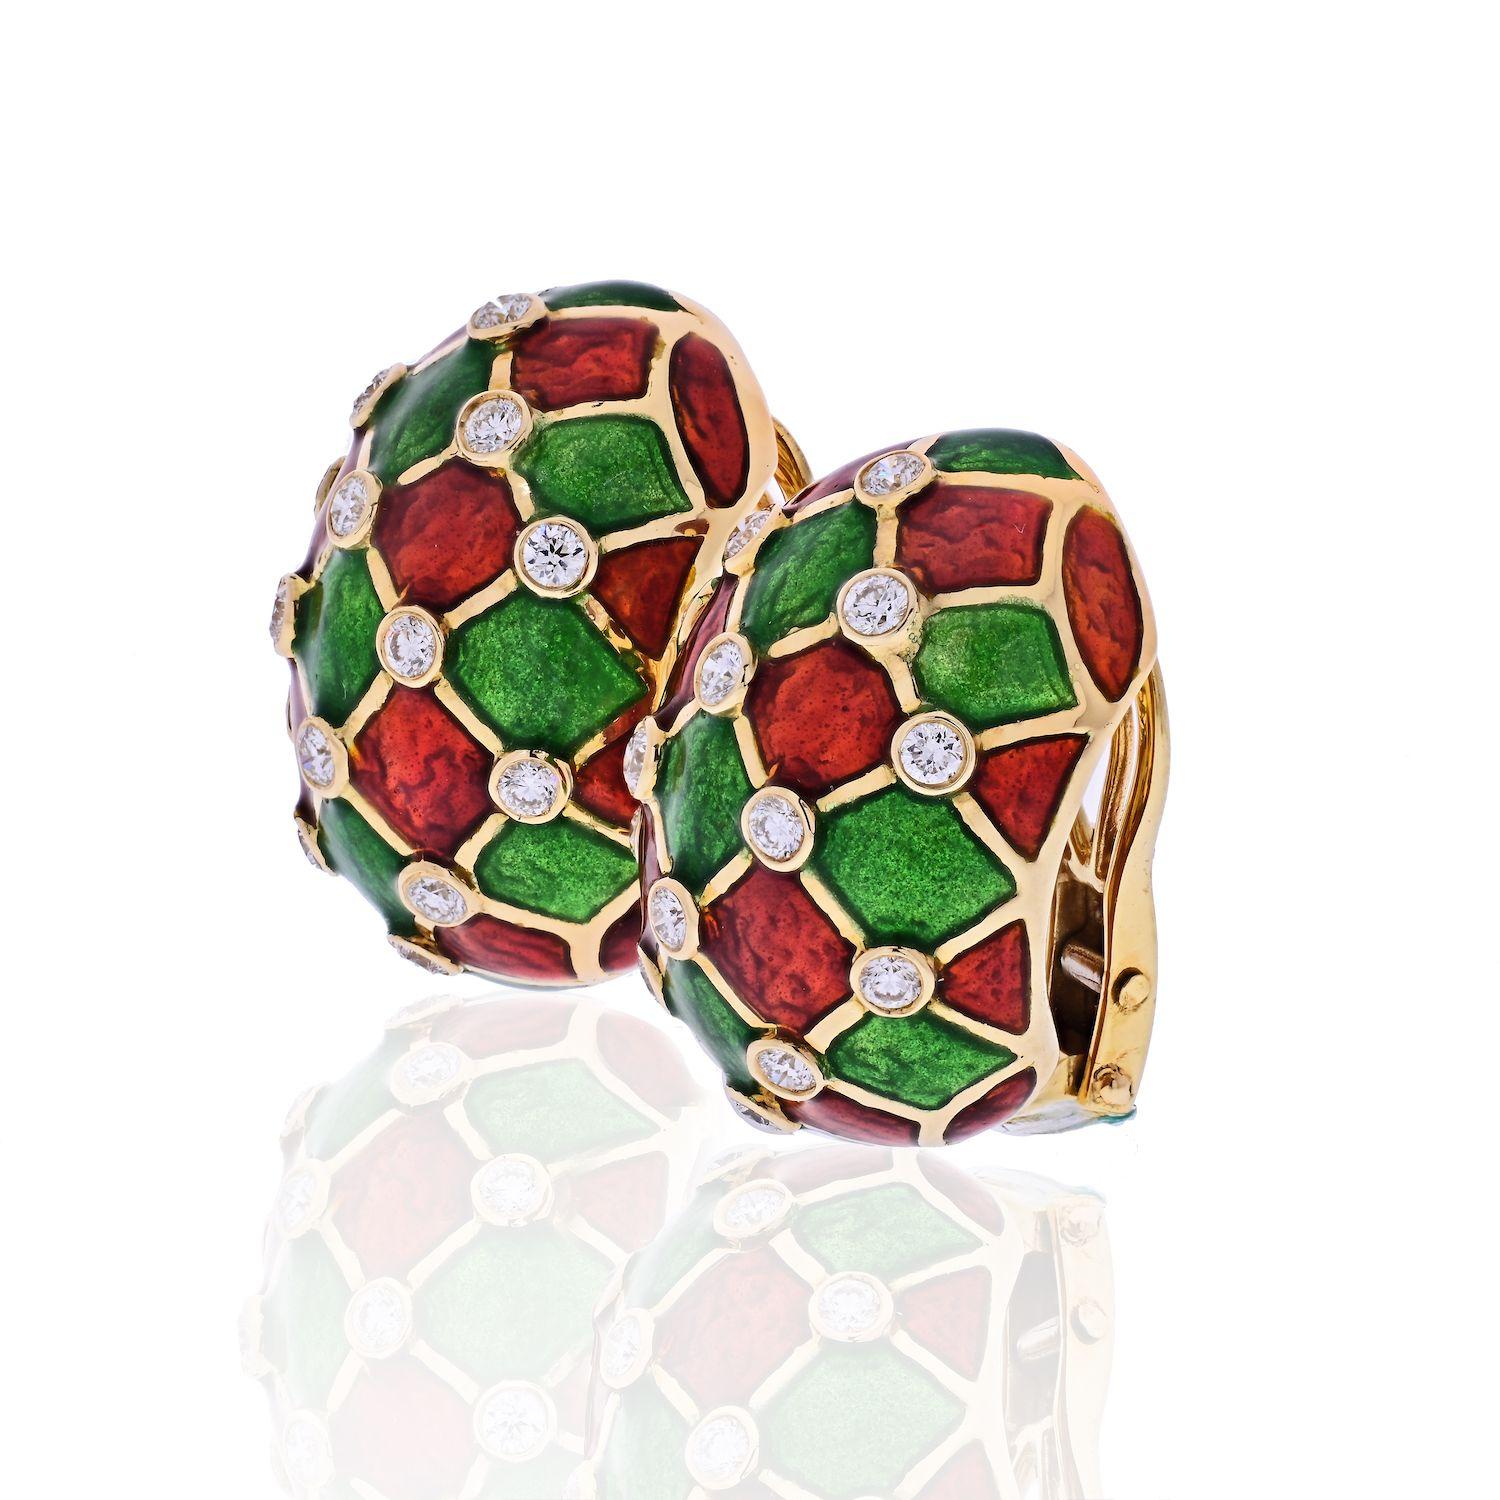 This glamorous pair of David Webb earrings is simply jaw dropping. The perfect gift for any lady truly deserving of sophistication and class. Finished with green and red enameling, accented by round cut diamonds. Measuring 25mm long. Clip-on